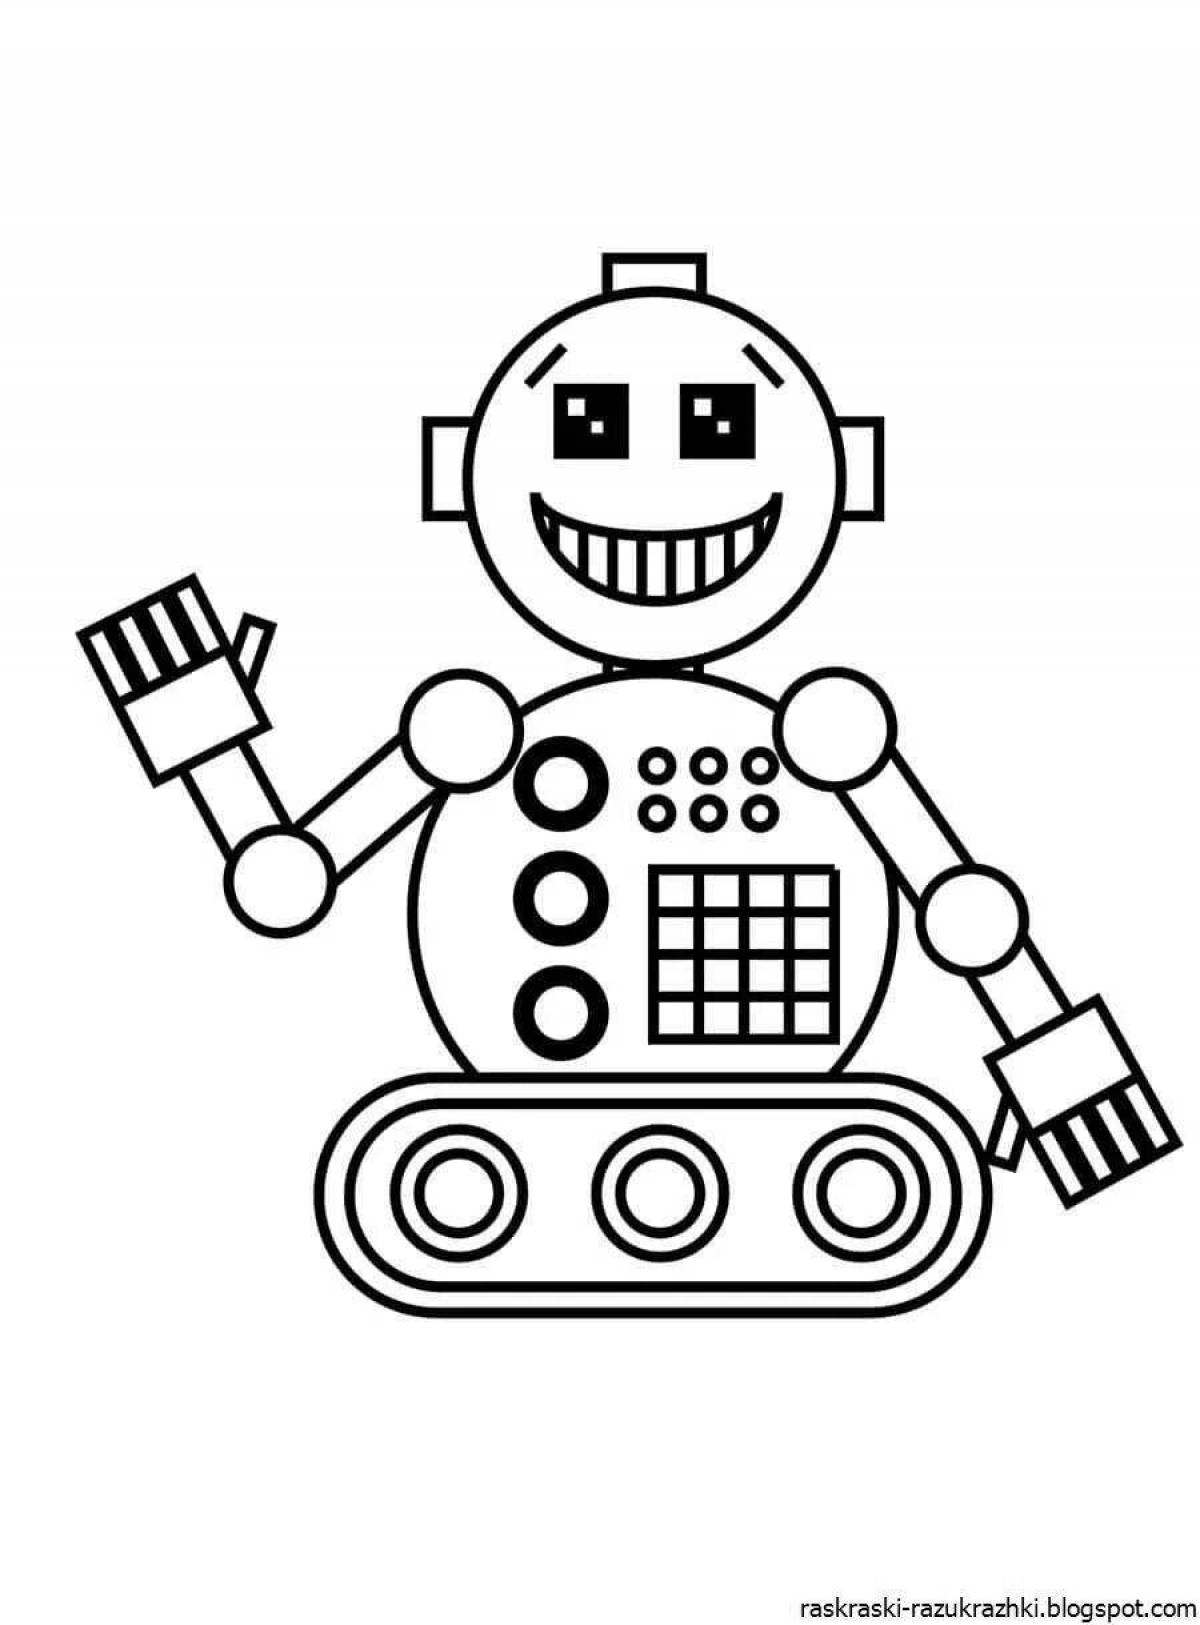 Fun coloring of robots for children